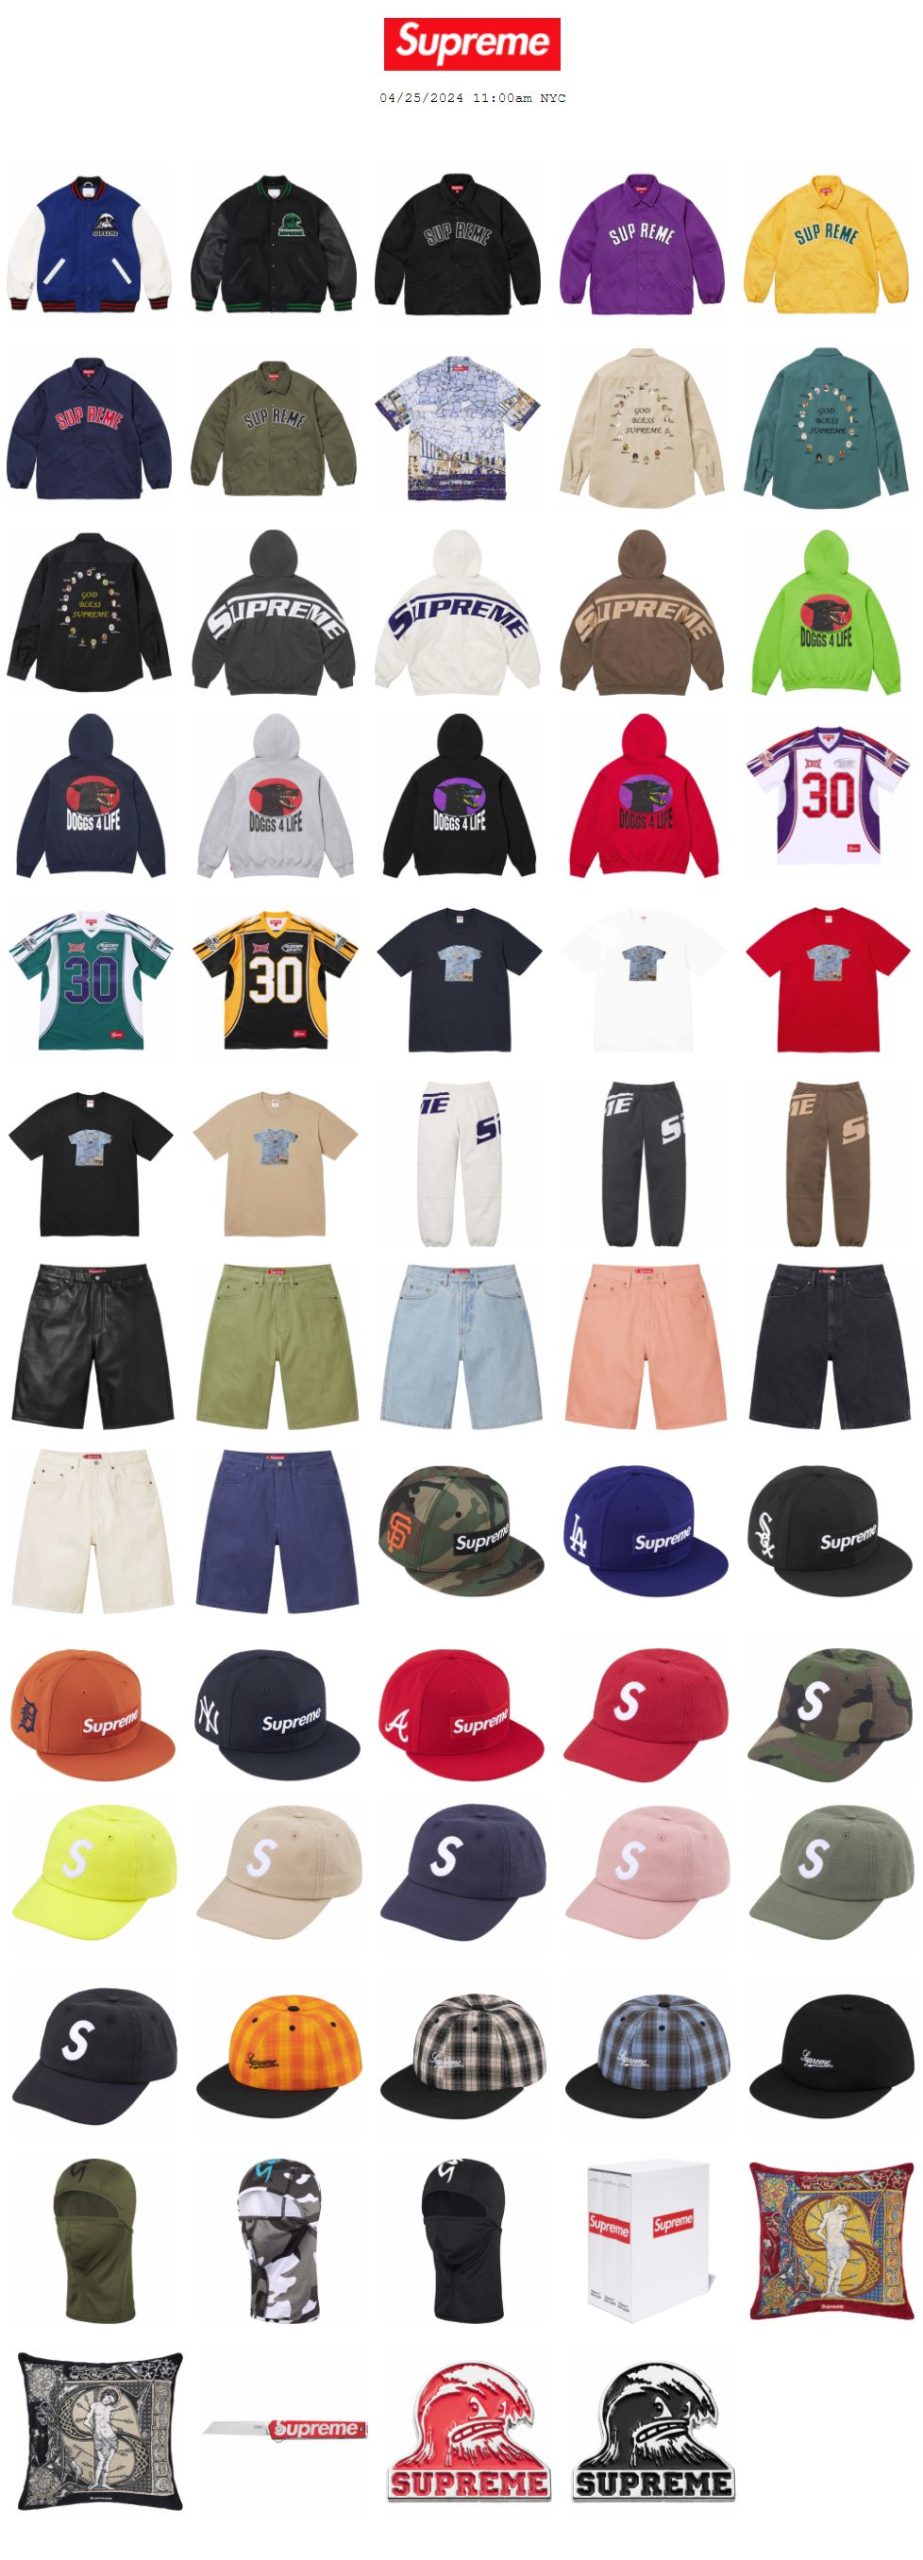 supreme-online-store-20240427-week11-24ss-release-items